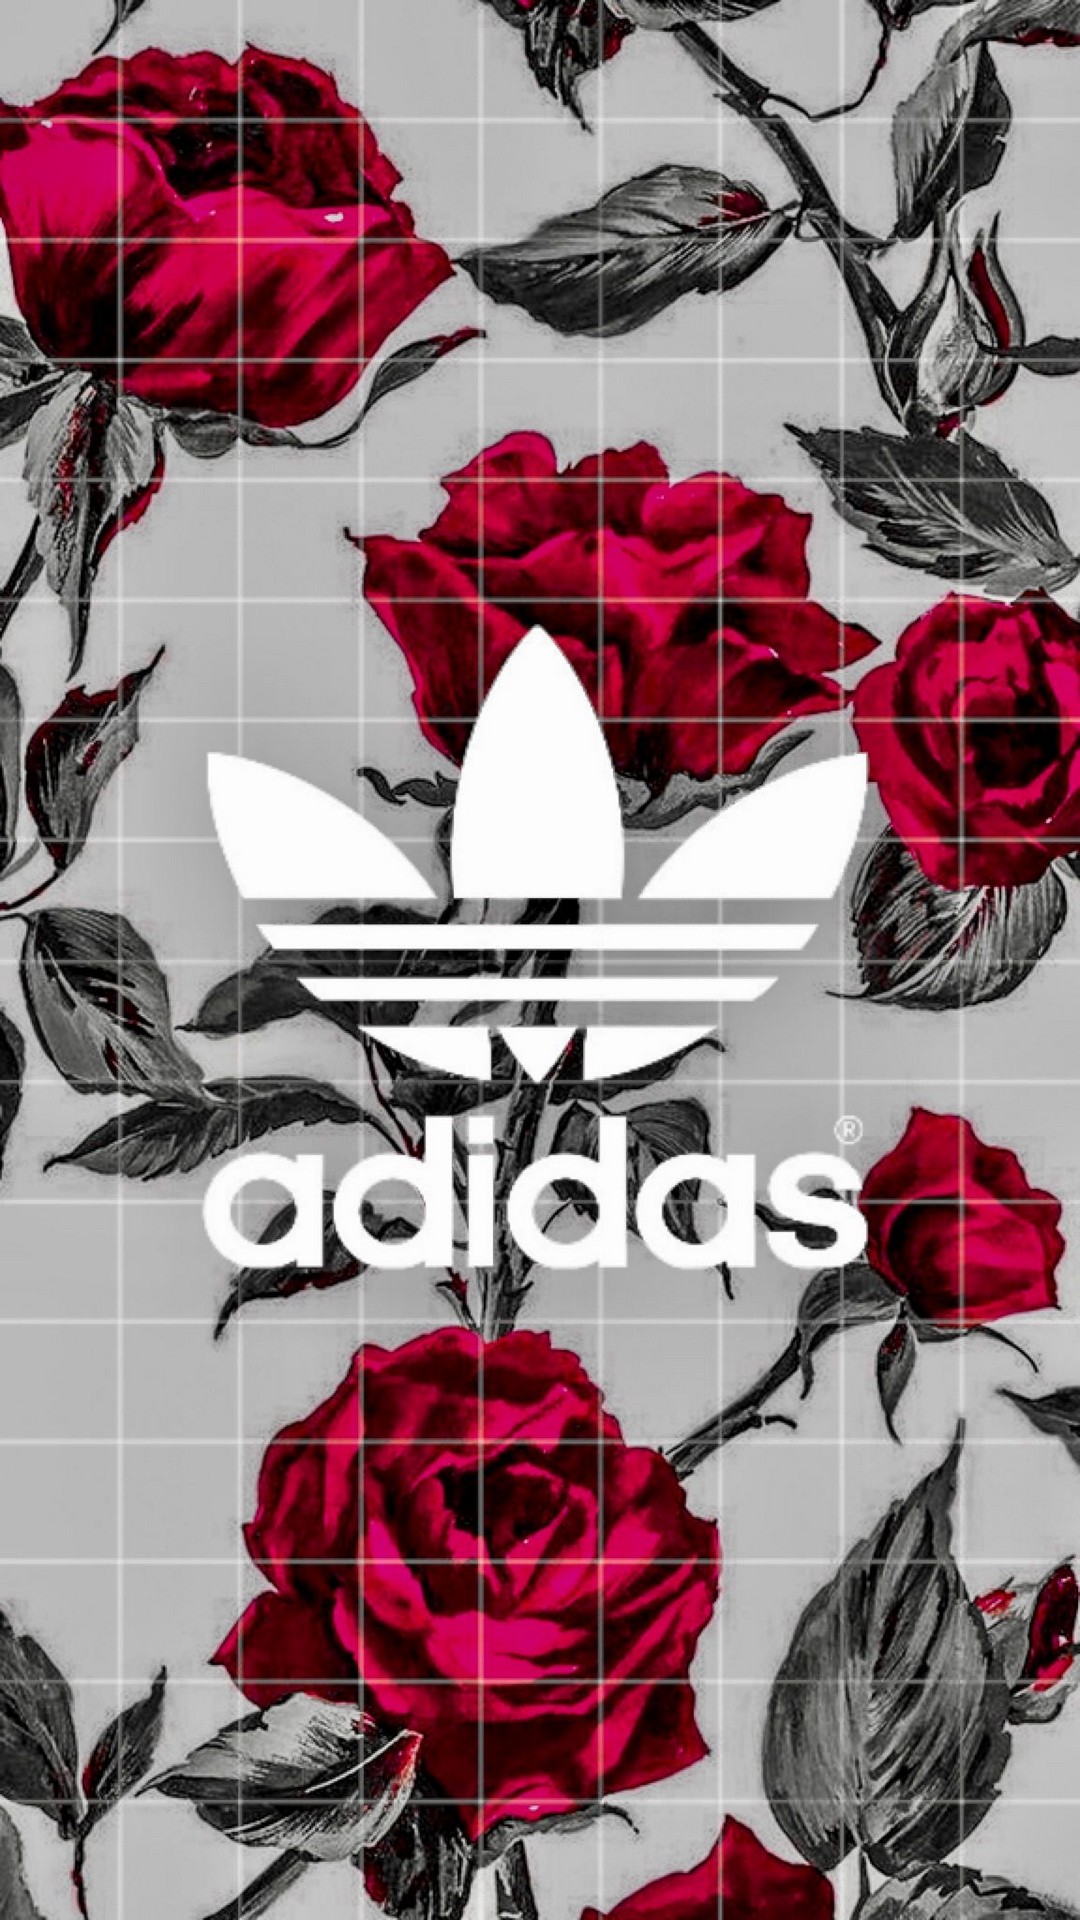 Adidas Logo iPhone Screen Lock Wallpaper With high-resolution 1080X1920 pixel. You can set as wallpaper for Apple iPhone X, XS Max, XR, 8, 7, 6, SE, iPad. Enjoy and share your favorite HD wallpapers and background images